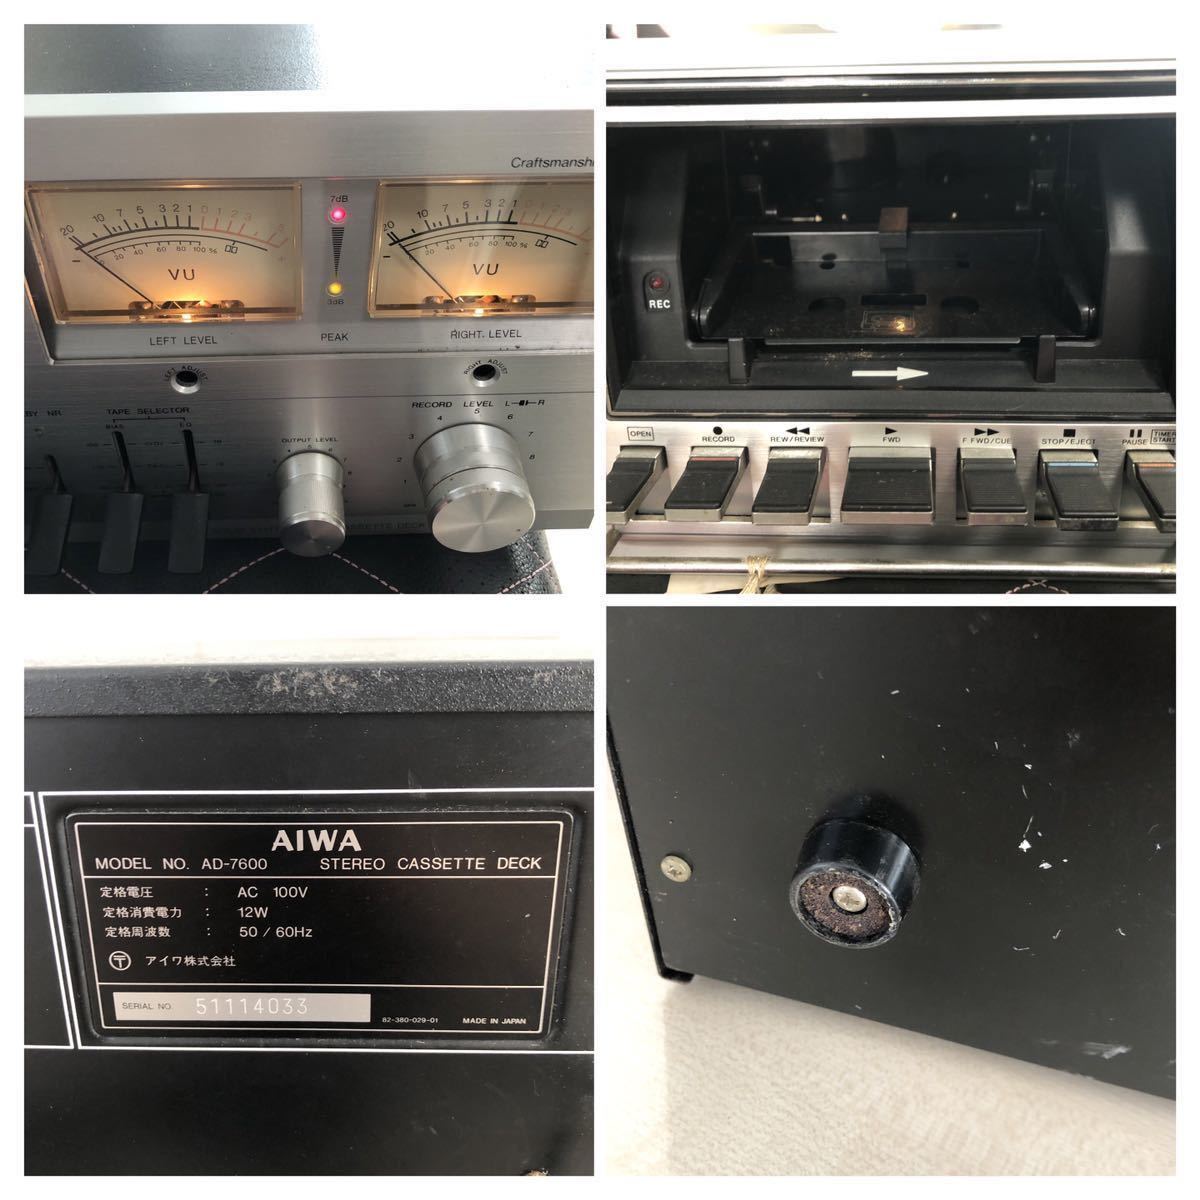 AIWA アイワ AD-7600 ステレオカセットデッキ SOLID STATE STEREO CASSETE DECK カセットデッキ 音響機器 K132S_画像10